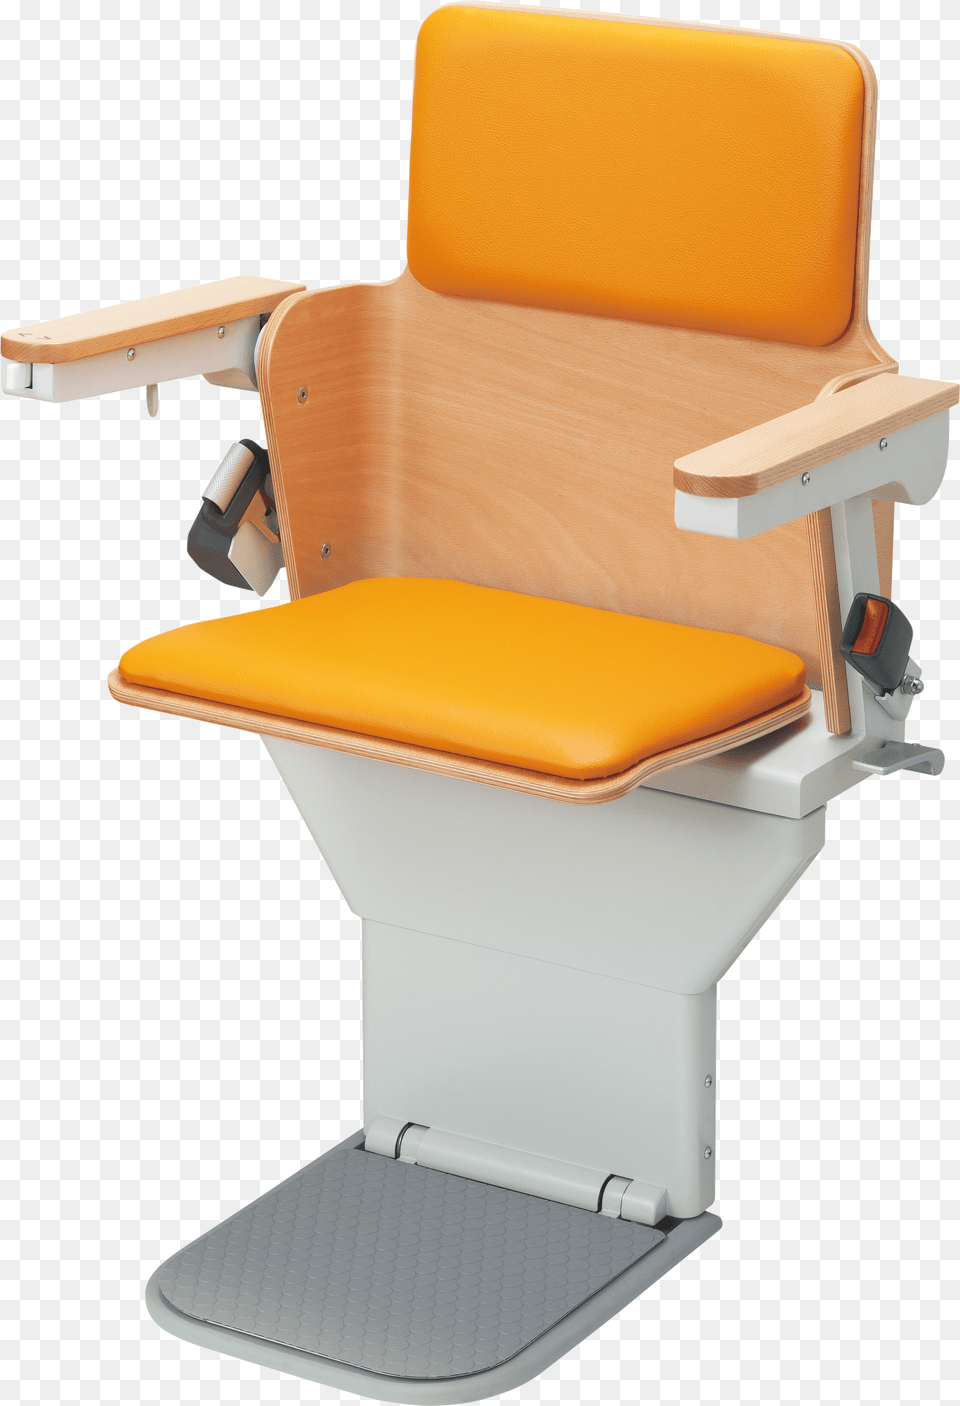 Stair Lift Orange Stair Lift, Cushion, Furniture, Home Decor, Chair Free Png Download